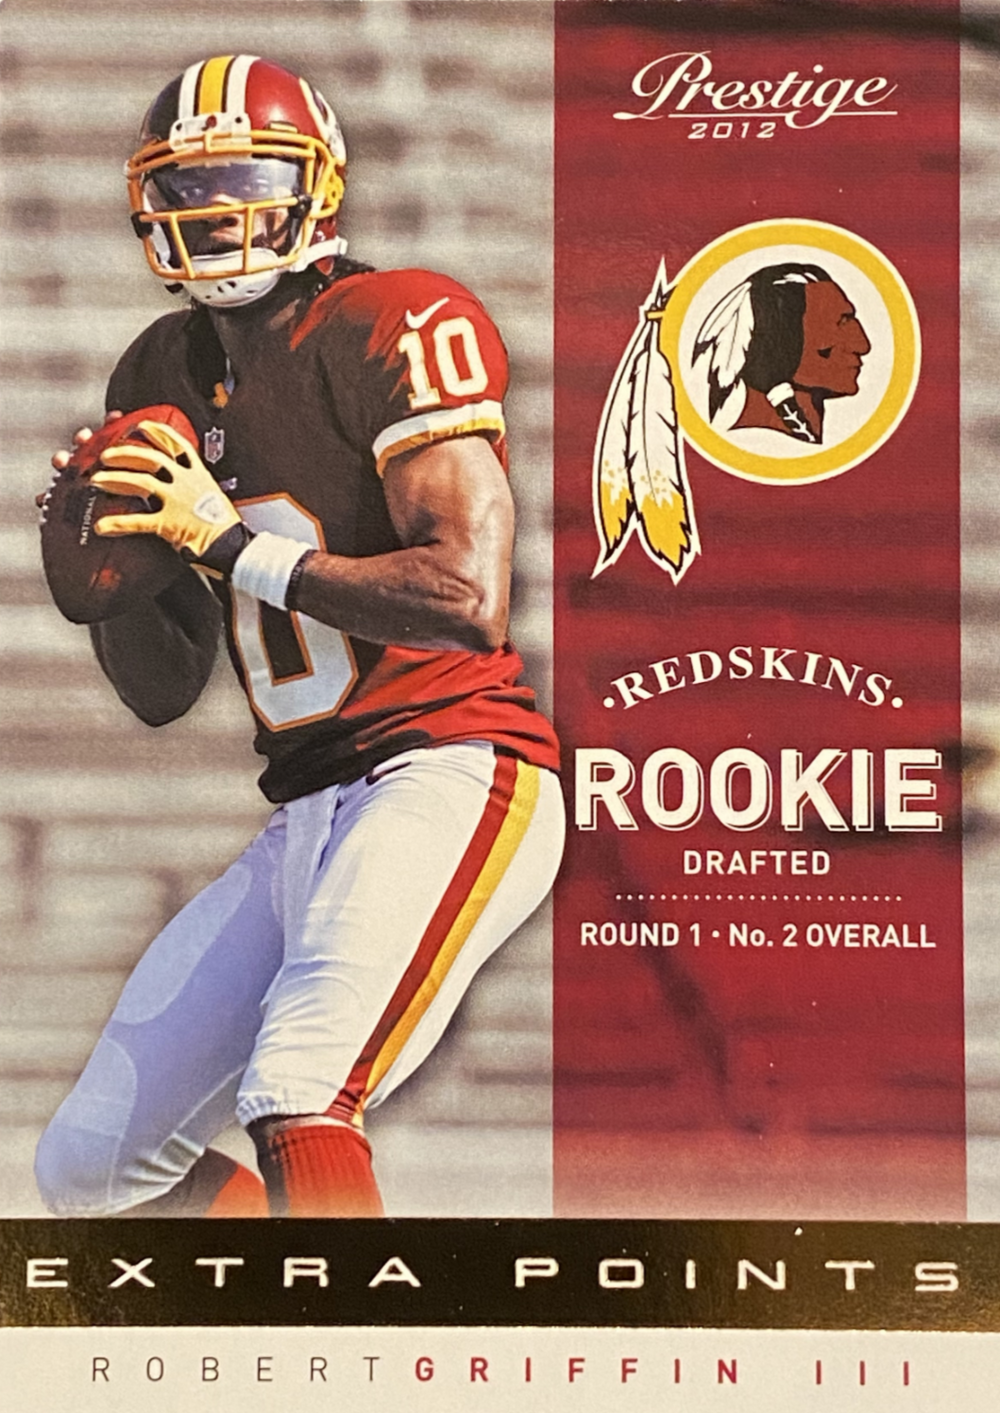 Robert Griffin 2012 Panini Prestige Extra Points Gold Series Mint Rookie Card #230